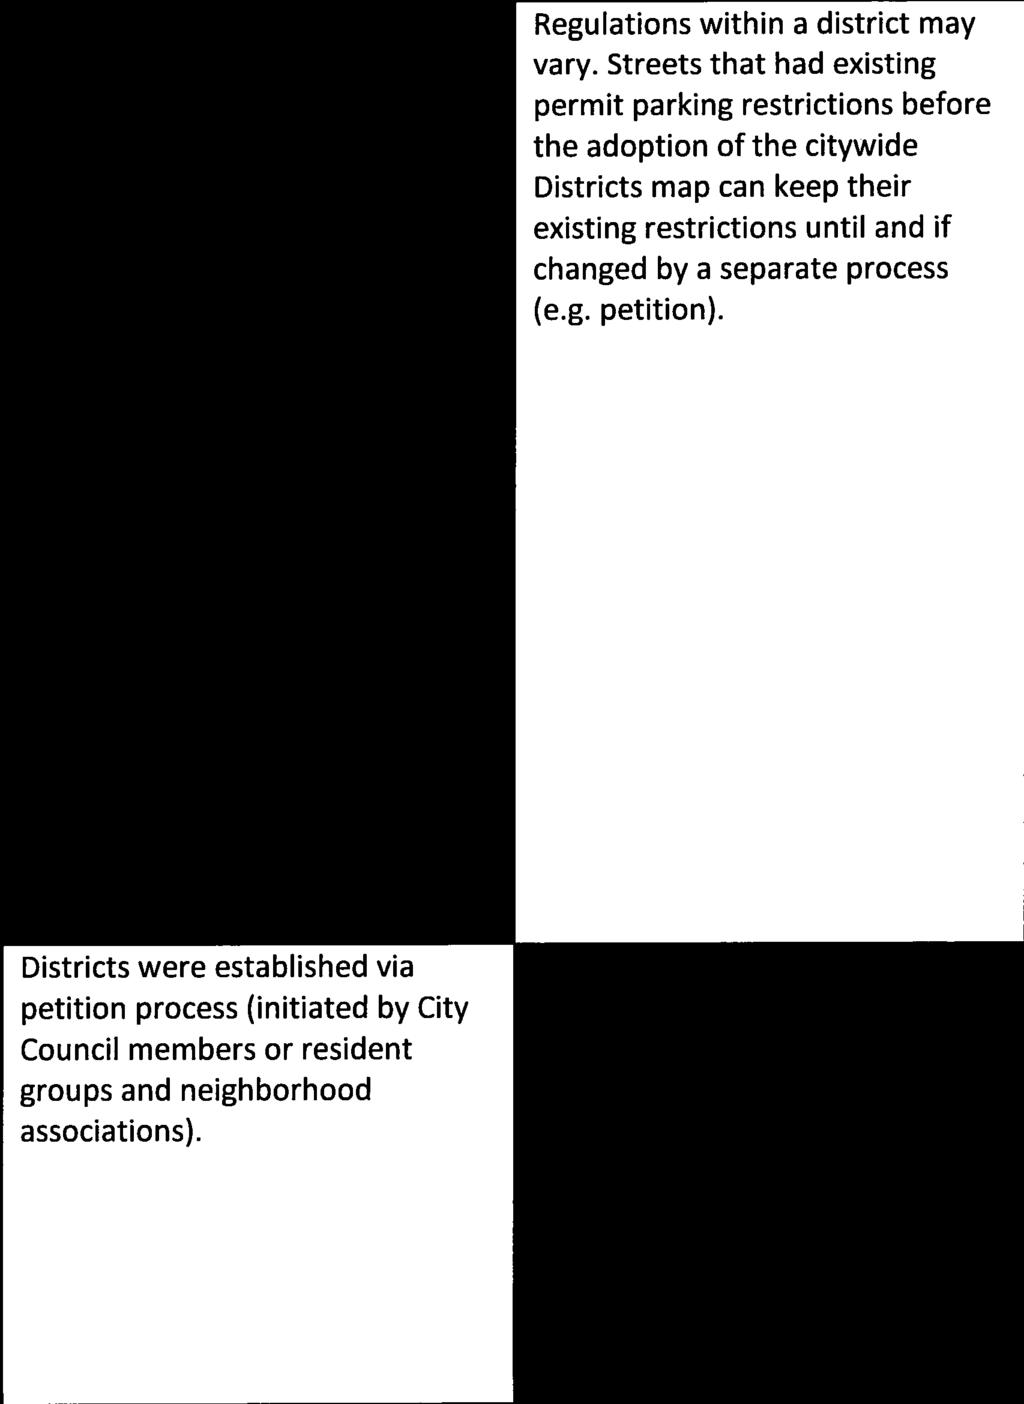 Streets that had existing and request for the pre-approved parking restrictions, containing a number of residential permit parking restrictions before the City Engineer is authorized to